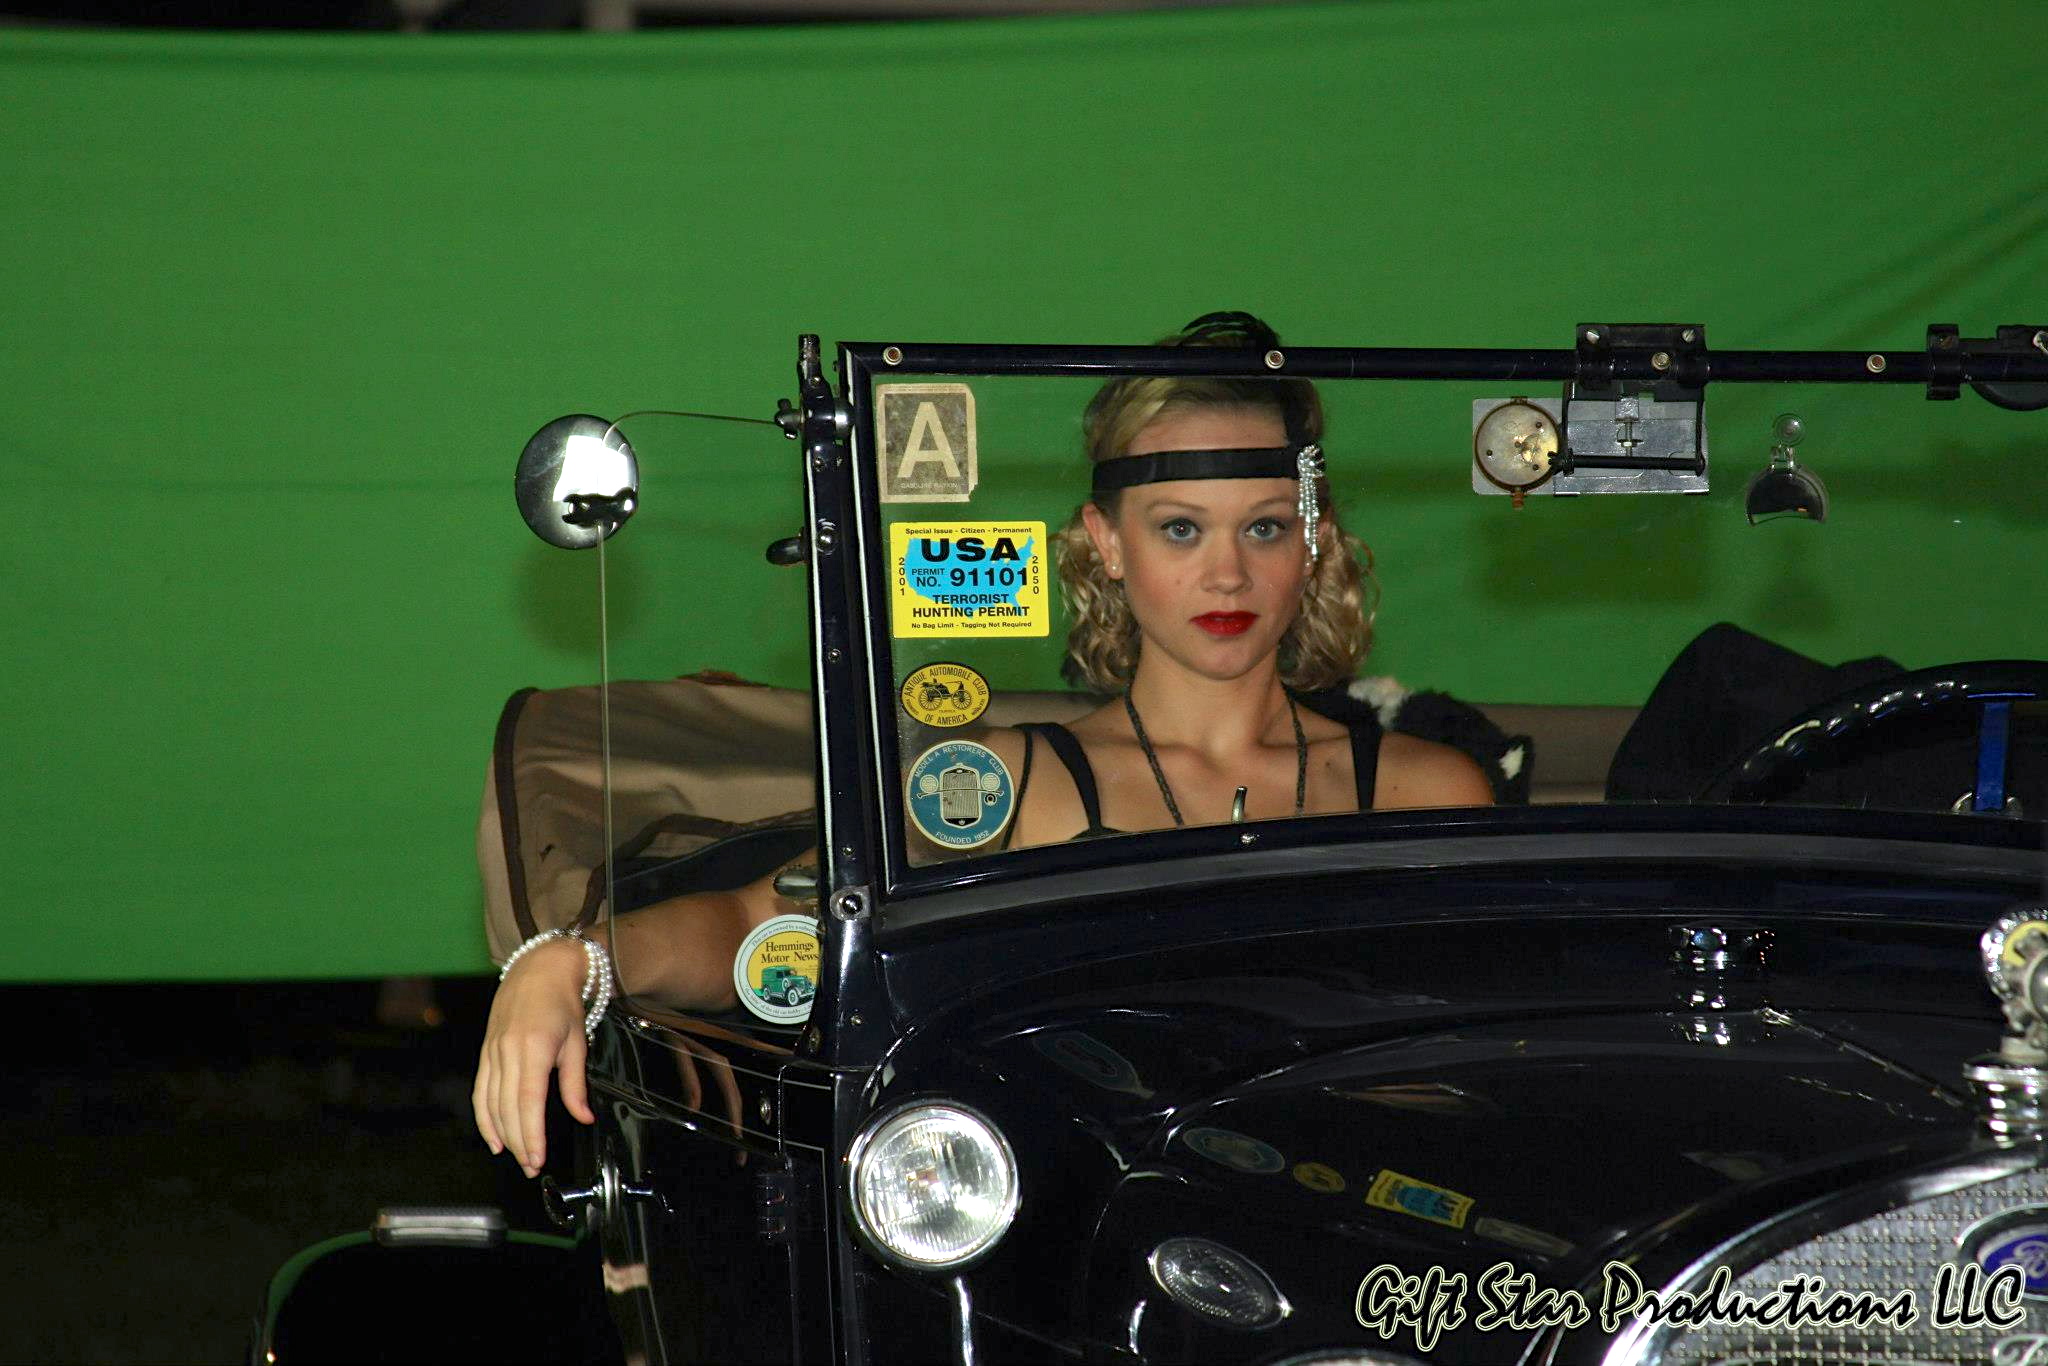 Lucianna on set in a vintage ride!